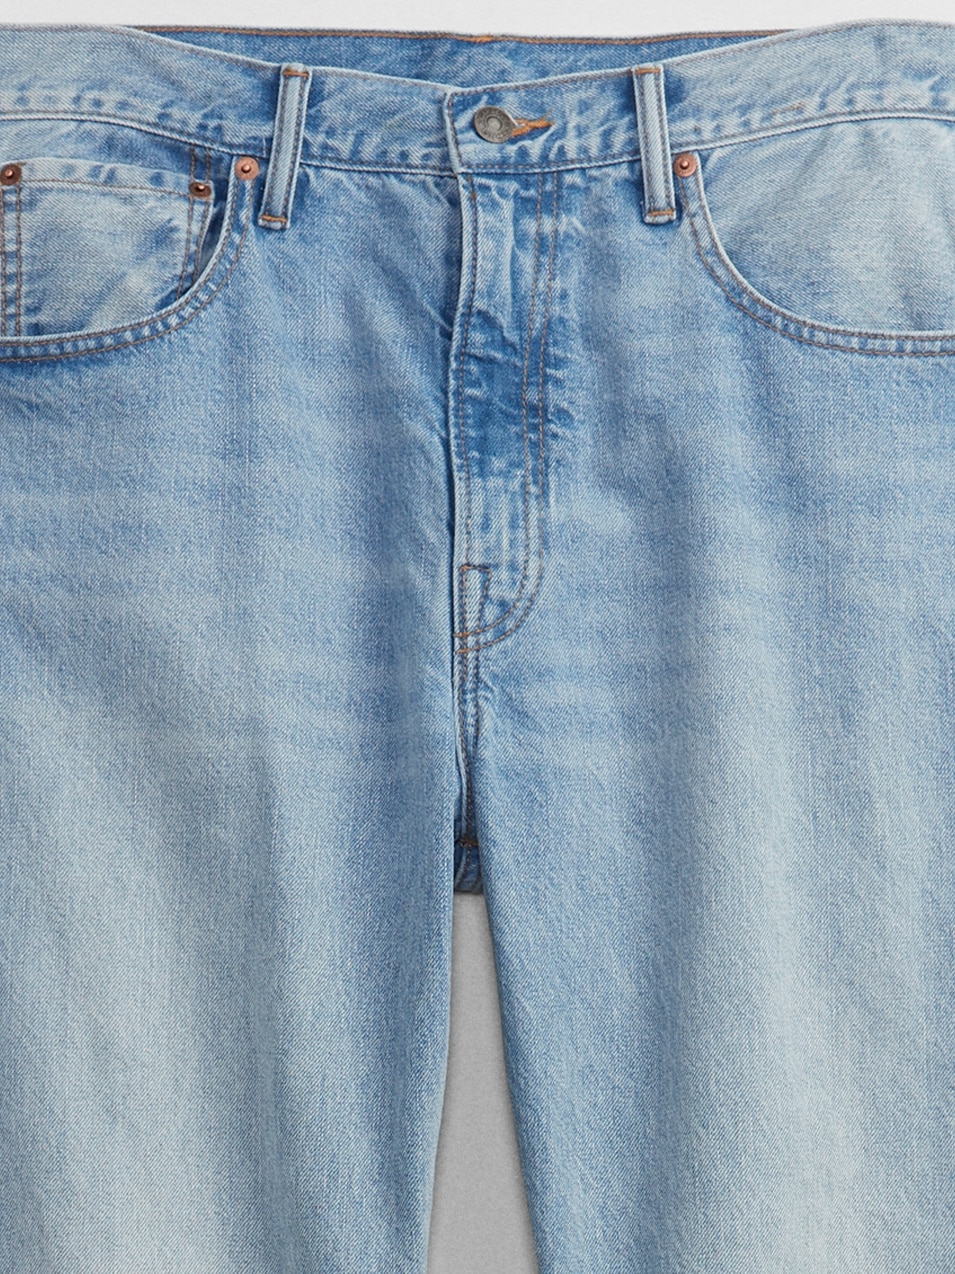 '90s Original Straight Jeans with Washwell | Gap Factory